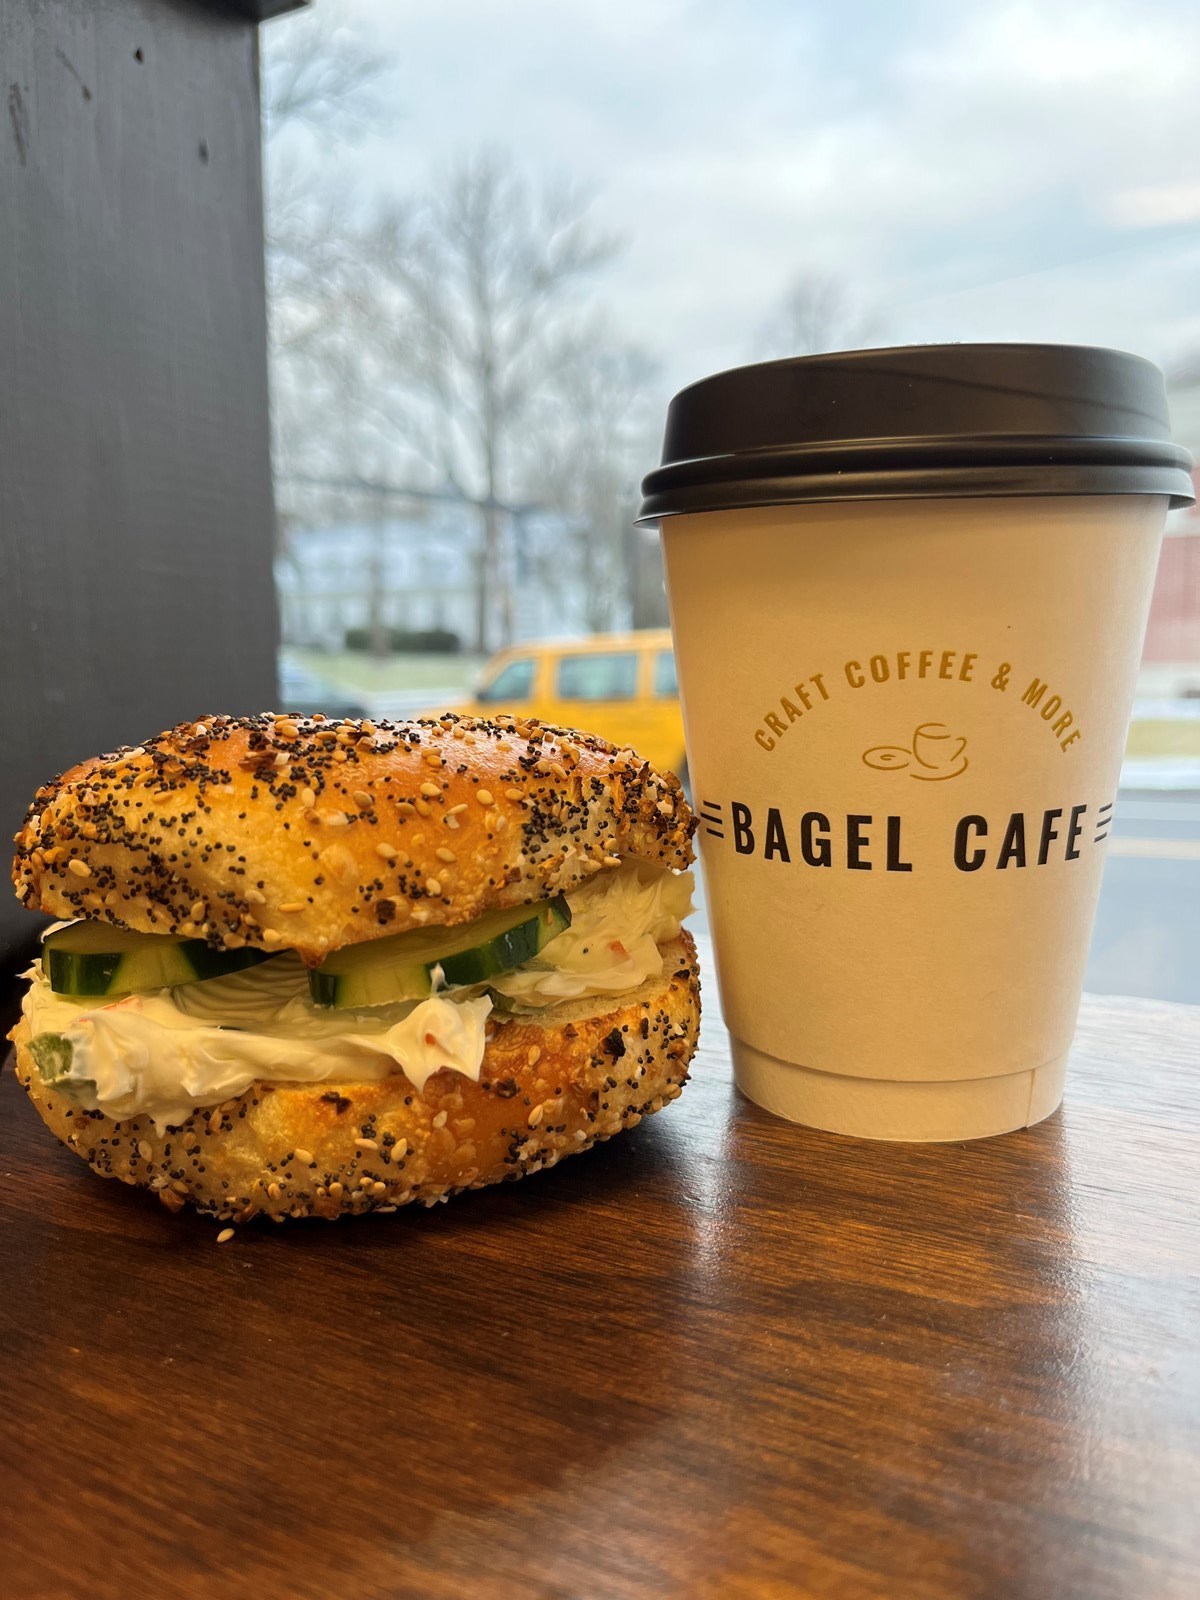 Coffee and a bagel sandwich